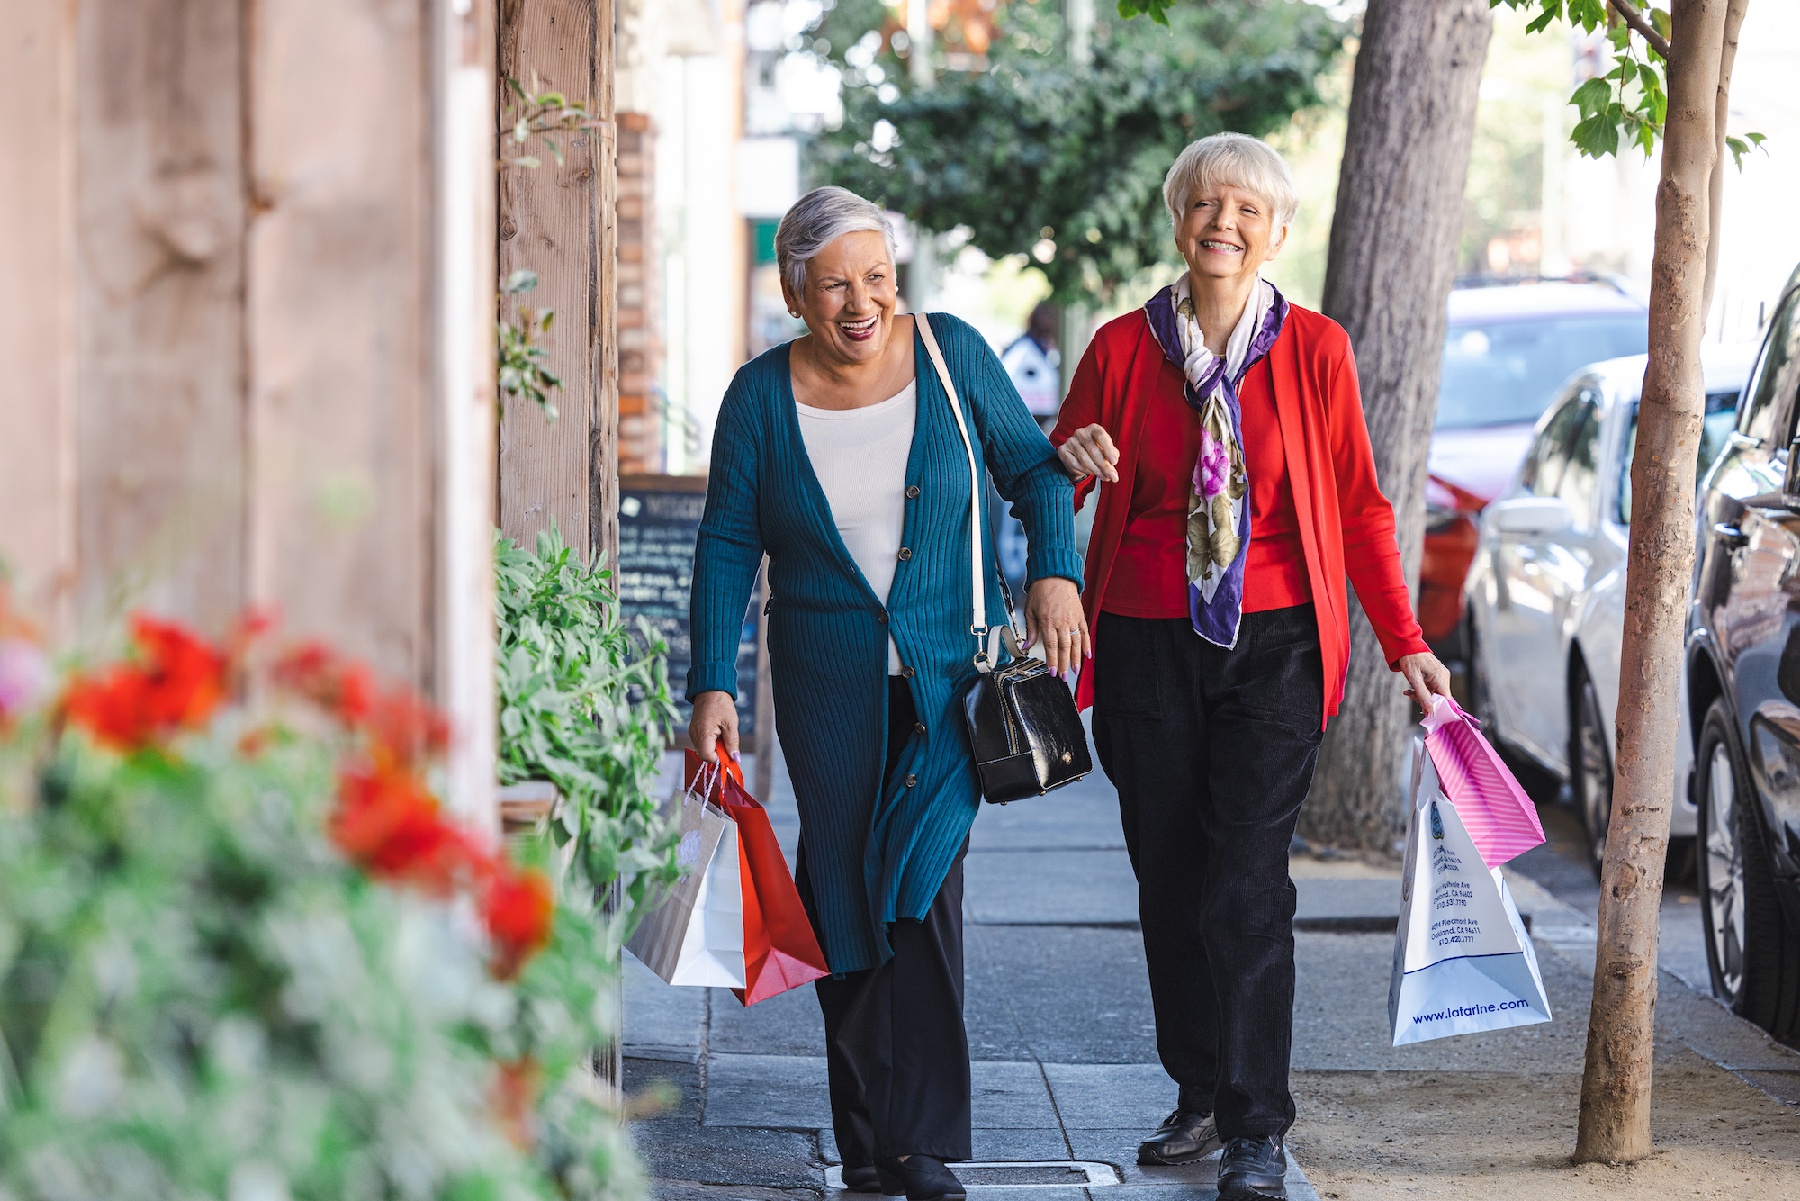 Two ladies walking together after shopping